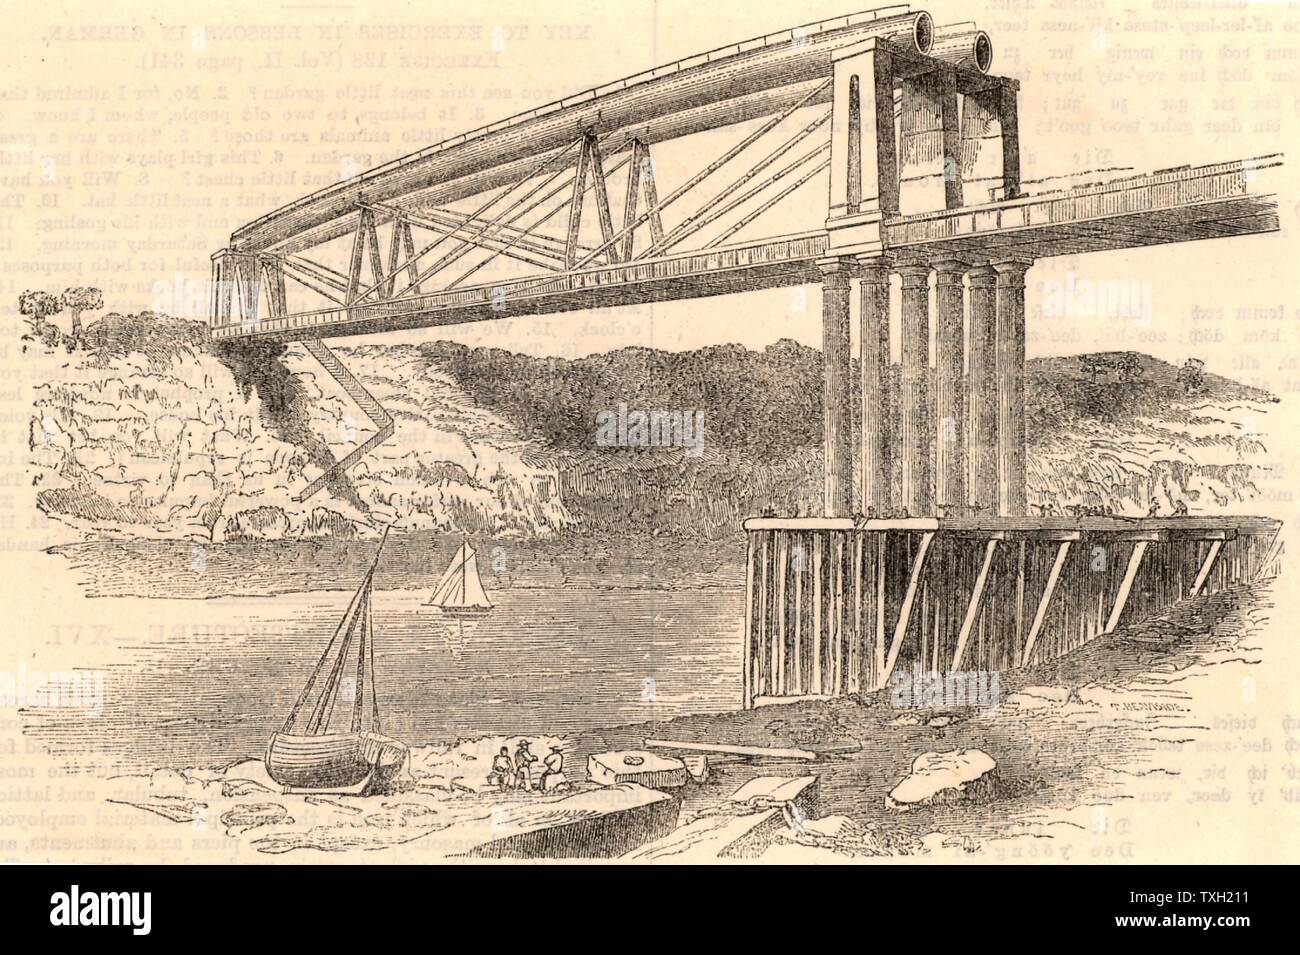 Wrought iron tubular trussed bridge over the river Wye at Chepstow, c1885.  This bridge, constructed 1849-1852, was an innovative design by Isambard Kingdom Brunel (1806-1859) and the use of wrought iron tubular girders is considered to be a dummy run for his last great masterpiece, the Royal Albert bridge over the Tamar at Saltash. The Chepstow bridge carried the South Wales Railway over the Wye. Brunel was engineer to the railway.   From 'The Popular Educator'. (London, c1885). Stock Photo